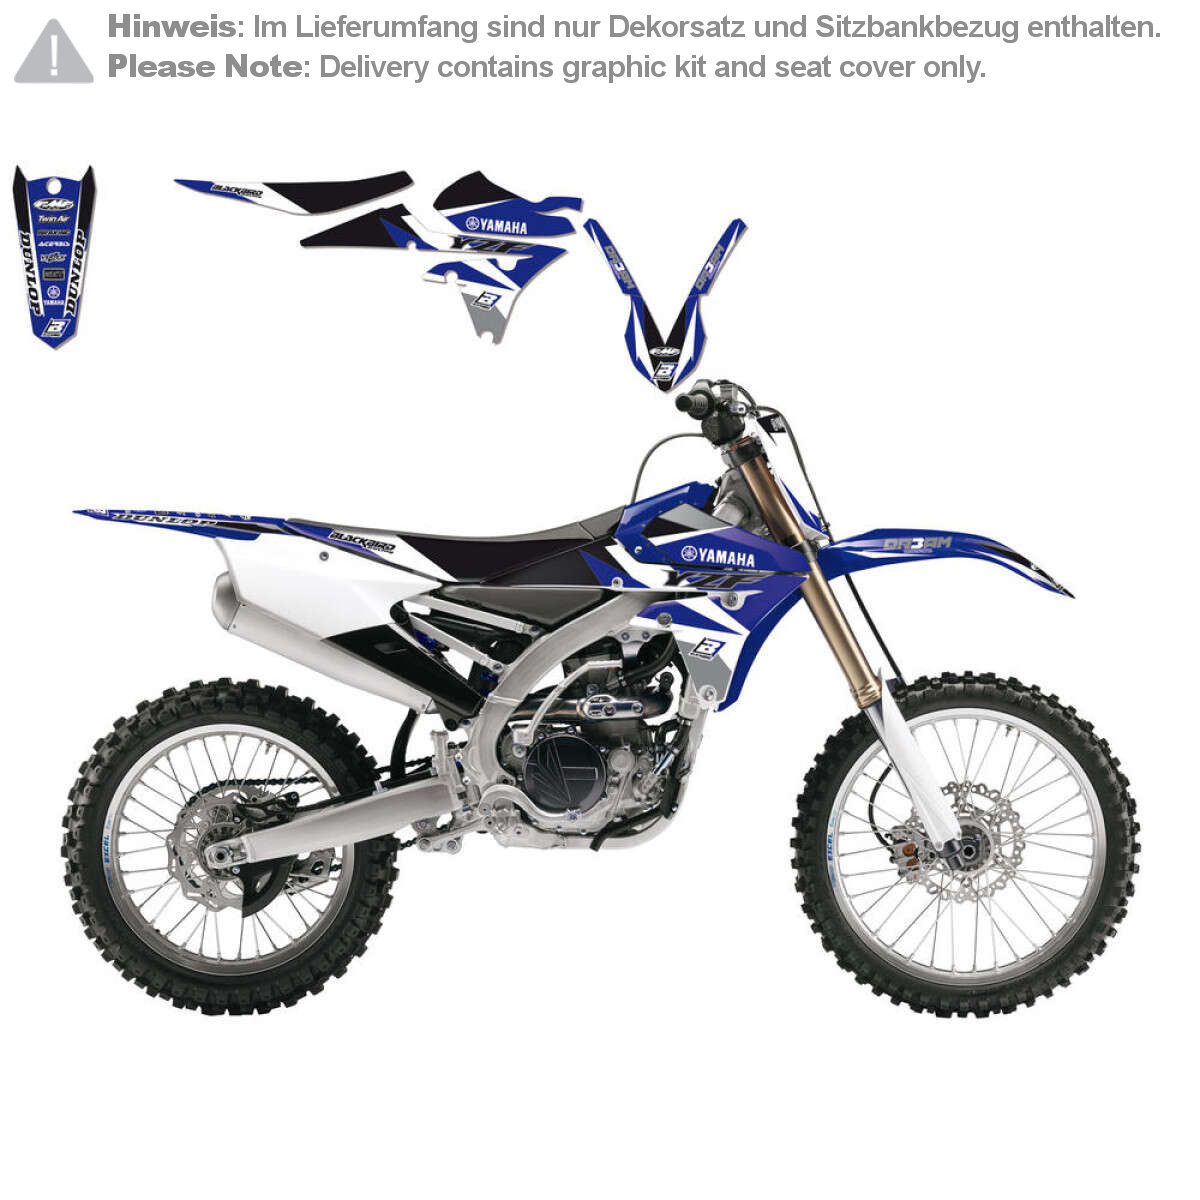 Blackbird Racing Graphic Kit with Seat Cover Dream 3 Yamaha YZ-F 250/450 14-17, Blue/Black/White